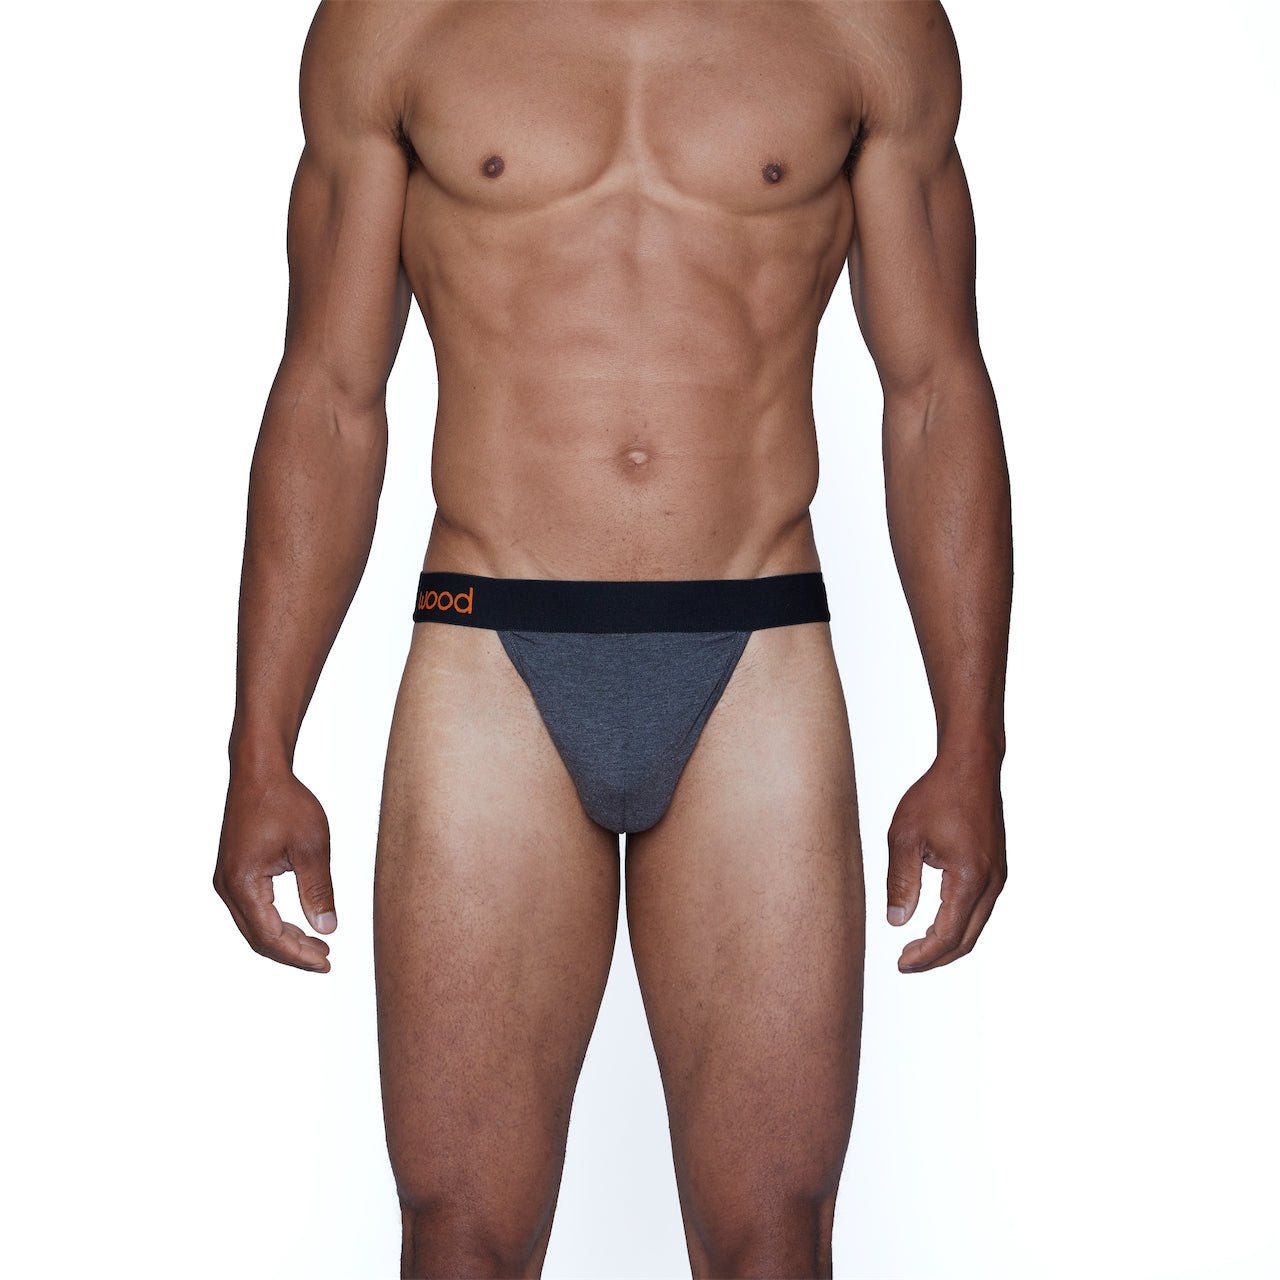 Men's Thong from Wood - Pinned Up Bra Lounge